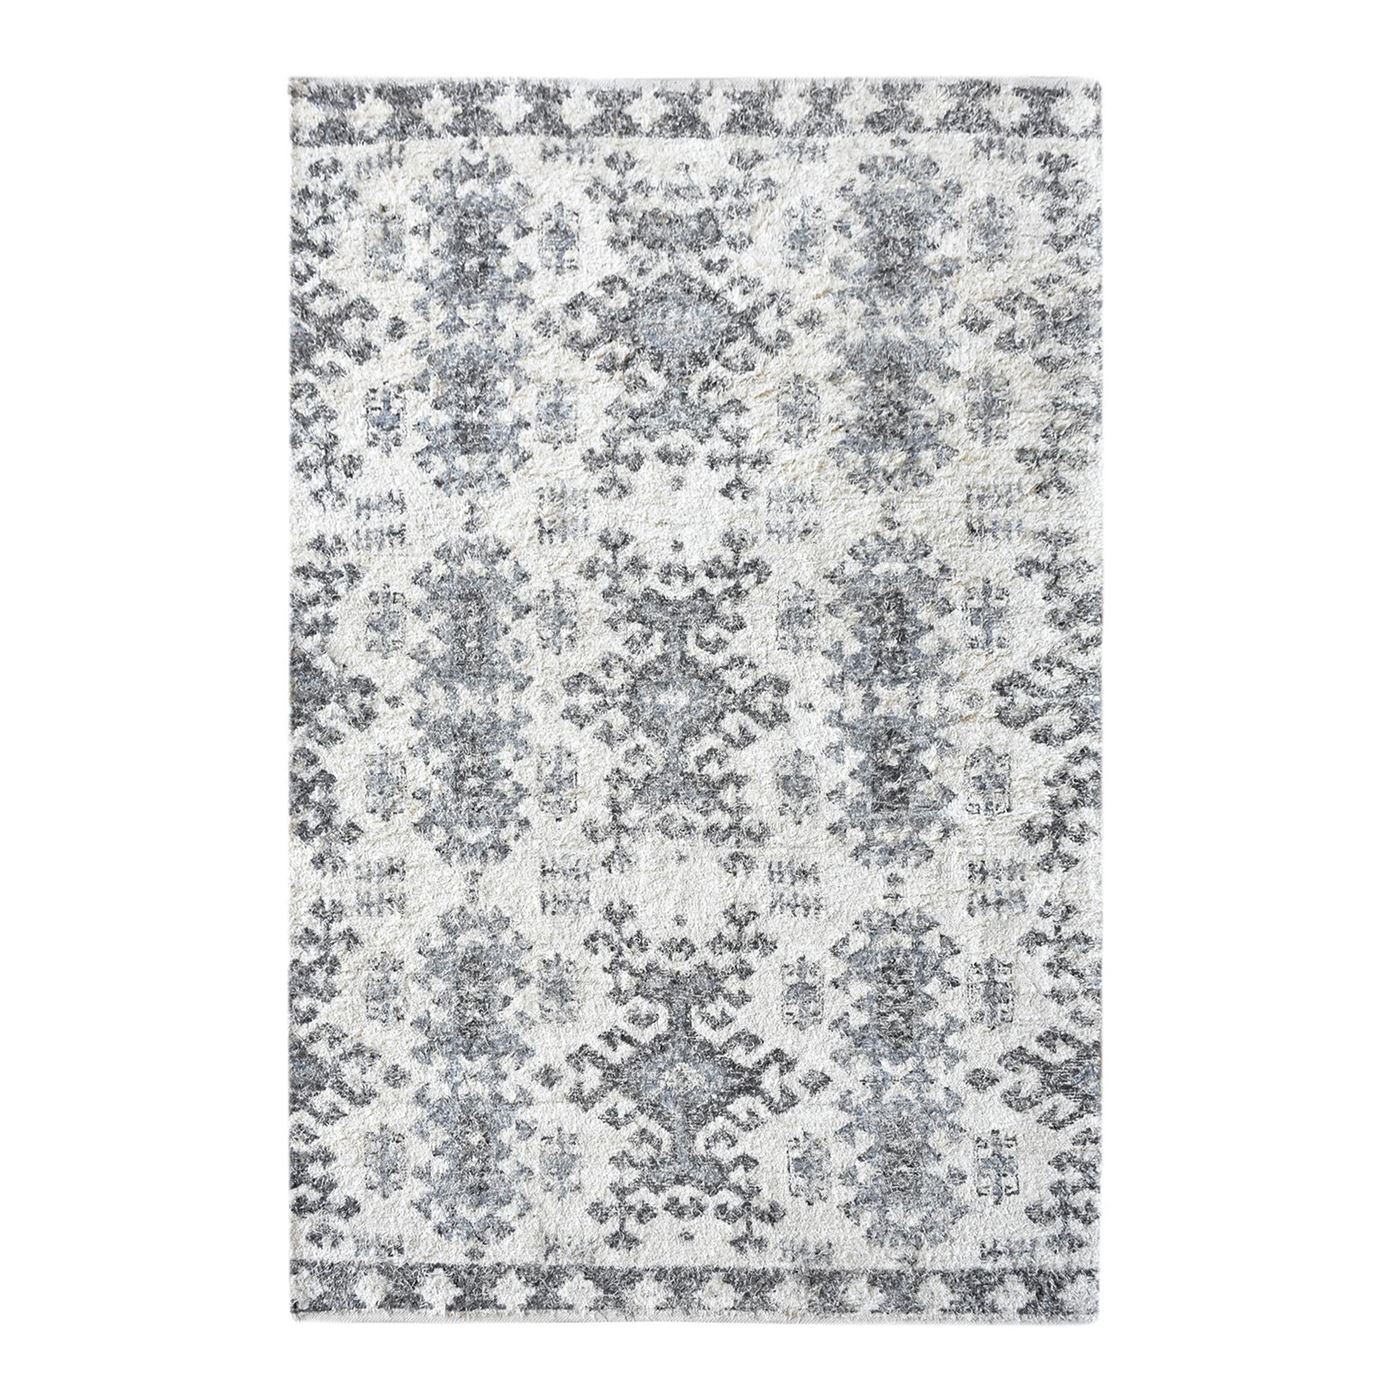 Area Rug, Bedroom Rug, Living Room Rug, Living Area Rug, Indian Rug, Office Carpet, Office Rug, Shop Rug Online, Recycled Cotton, Printed, Natural White, Grey, Hand knotted, All Cut, Printed